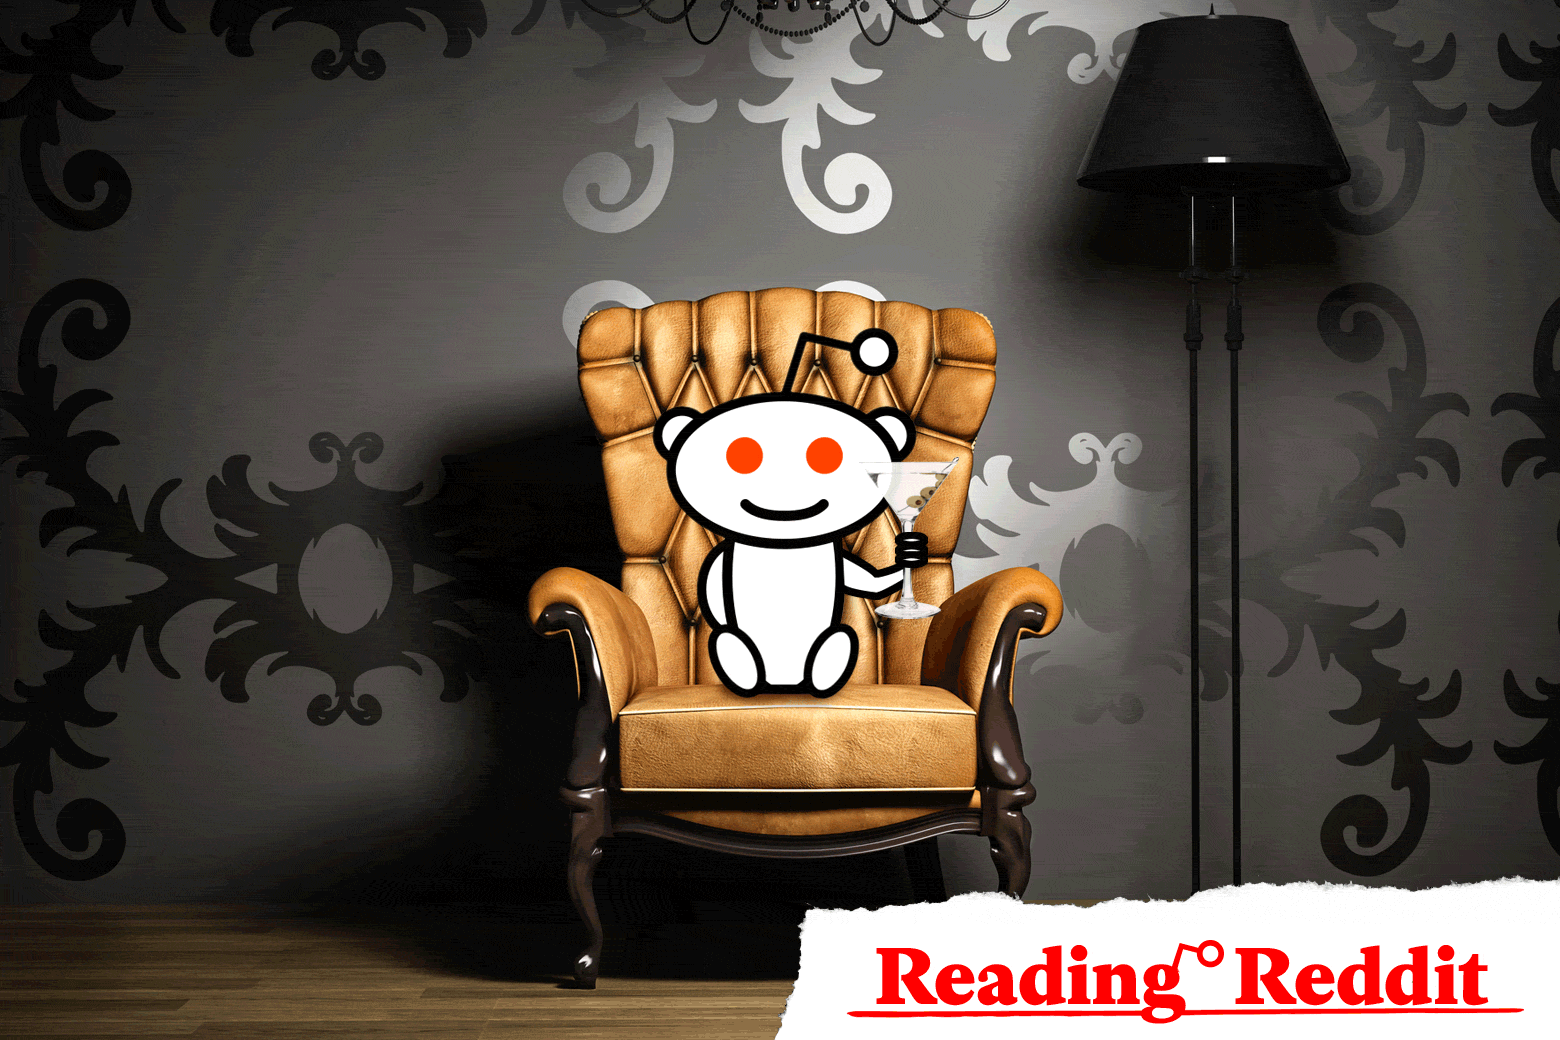 The Reddit snoo sitting in a high-backed chair while holding a martini glass.